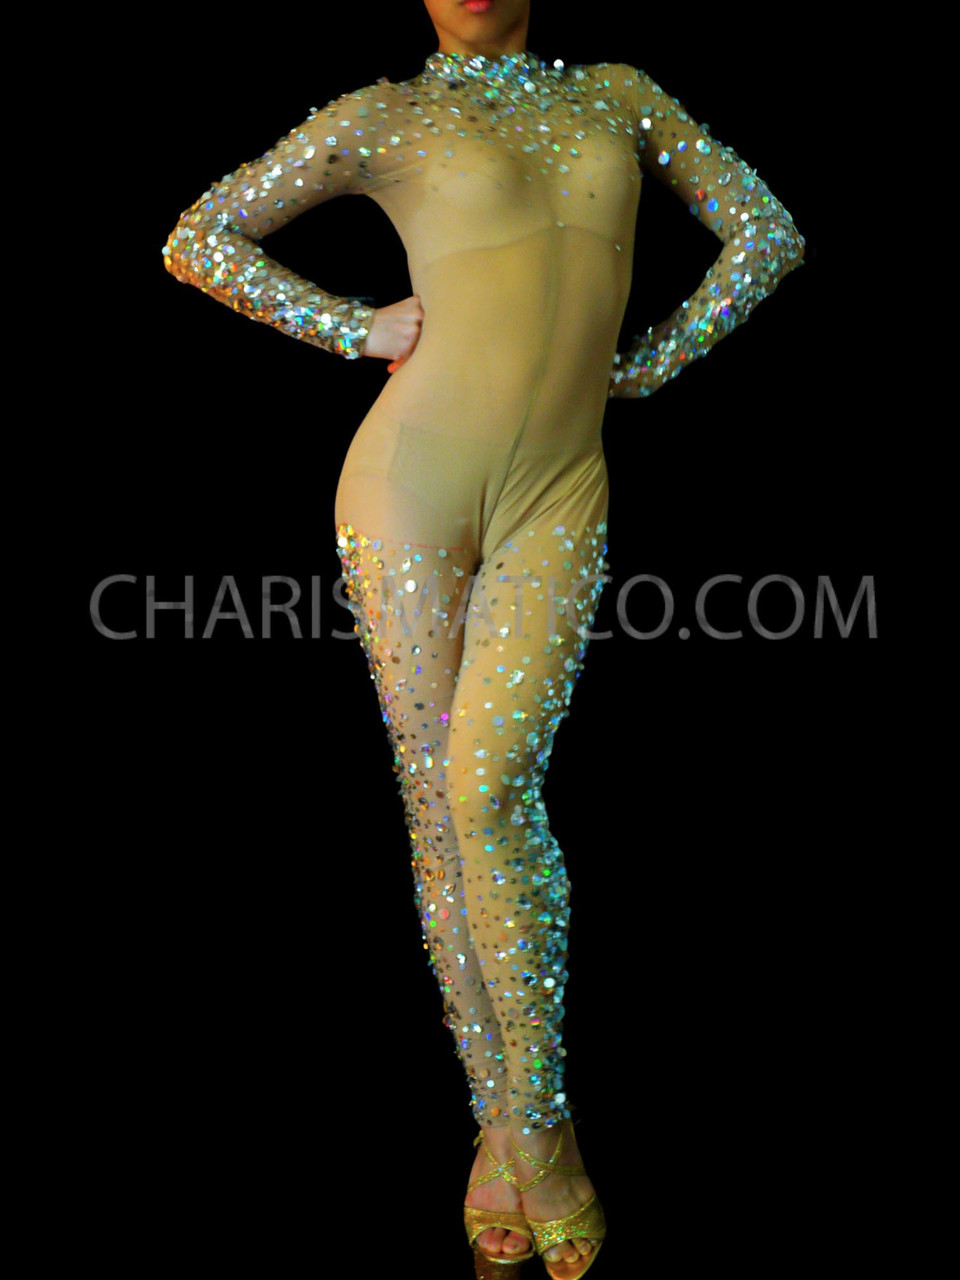 https://cdn11.bigcommerce.com/s-07991/images/stencil/1280x1280/products/794/58583/Sheer_Nude_Body_Stocking_With_Iridescent_Sequins_And_Crystals_BL0535_3__75013.1605673669.jpg?c=2